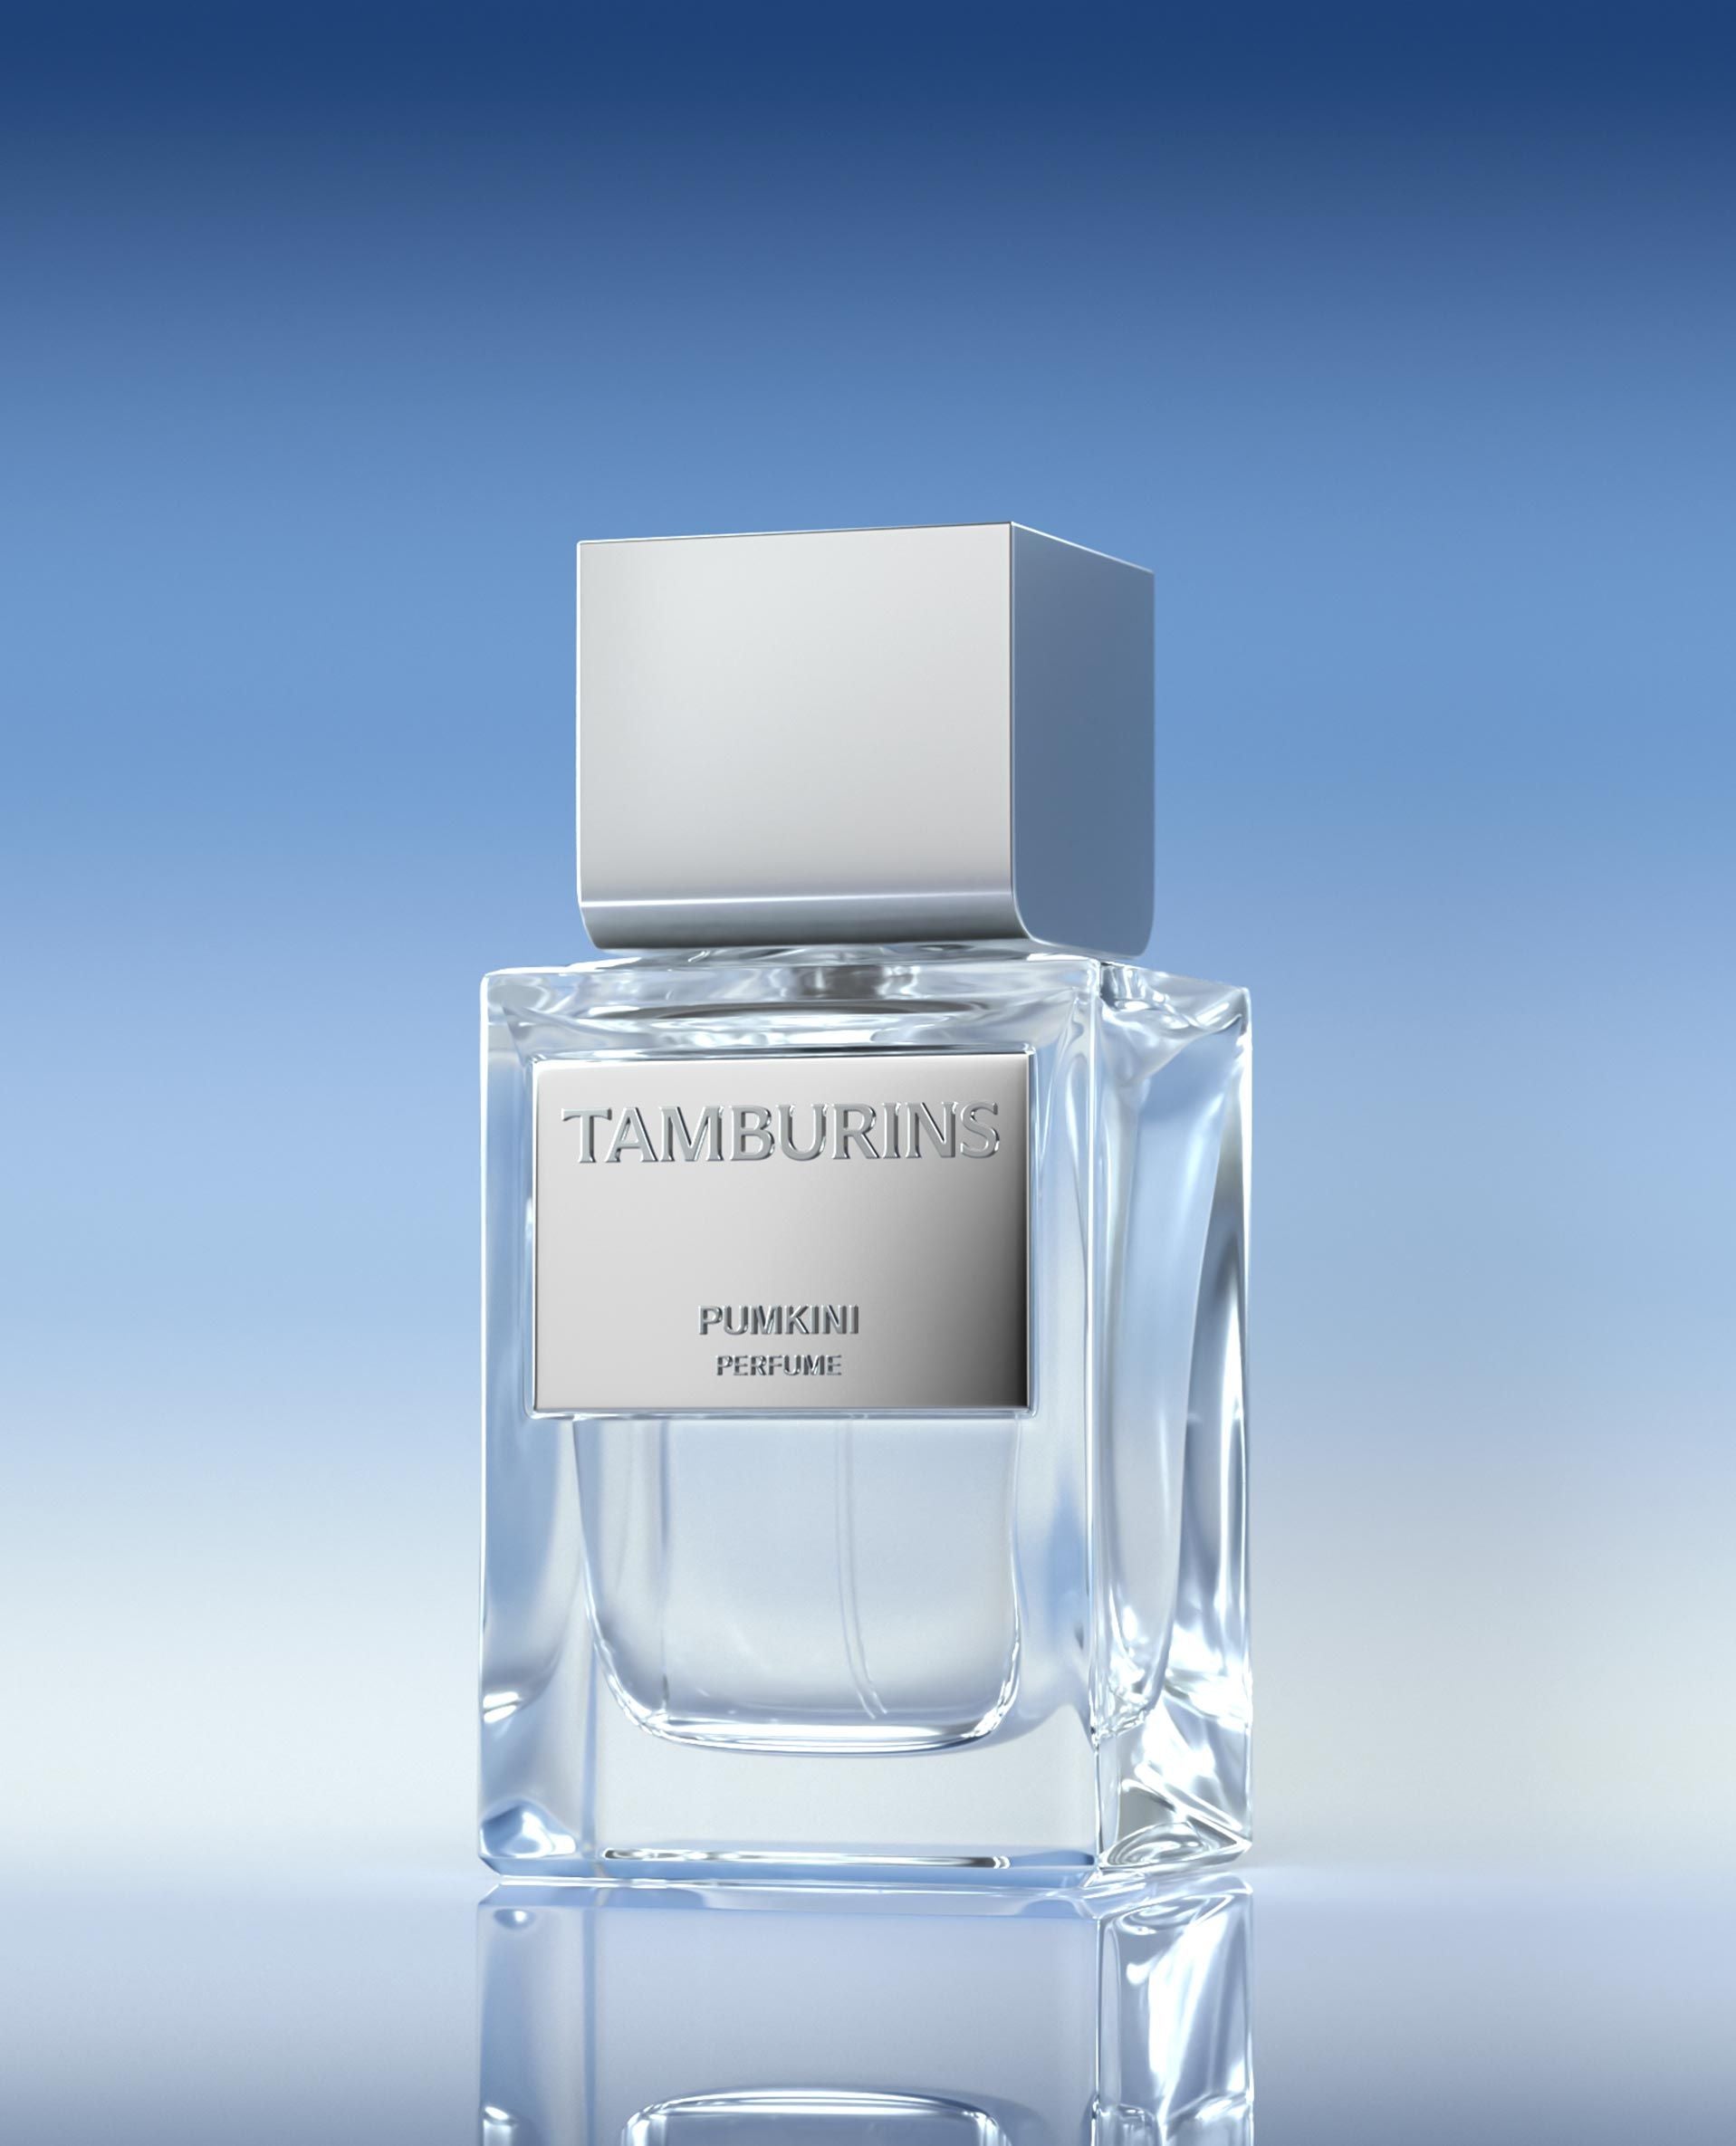 a bottle of TAMBURINS THE EGG PERFUME PUMKINI 50ml perfume sitting on top of a table